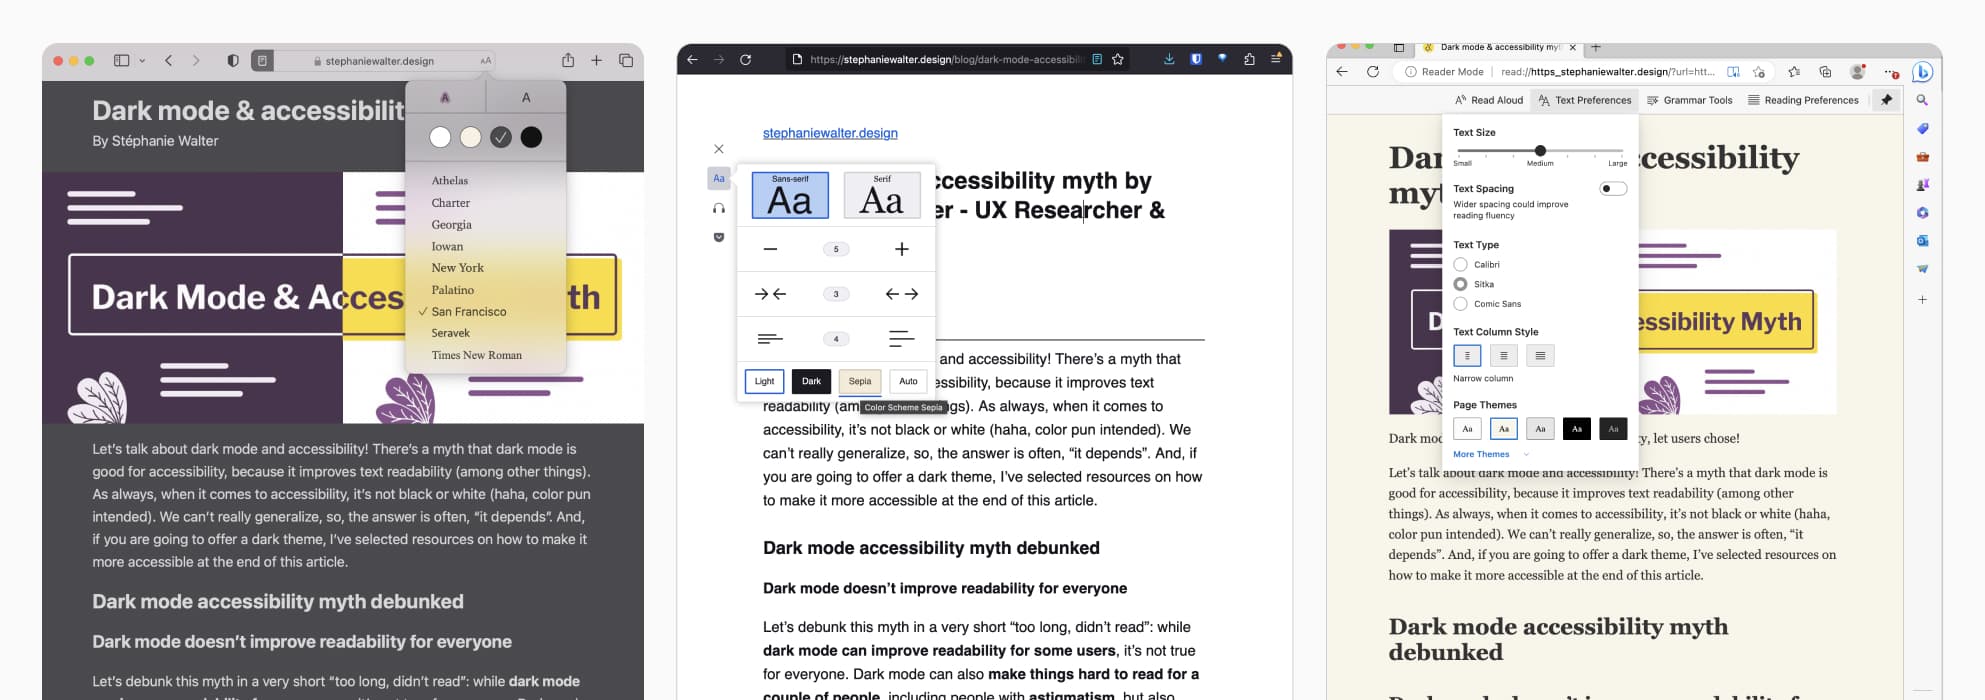 Examples of Safari, Firefox and Edge reading mode with different options to customize the text, from light to dark mode with different shades of gray and sepia in between